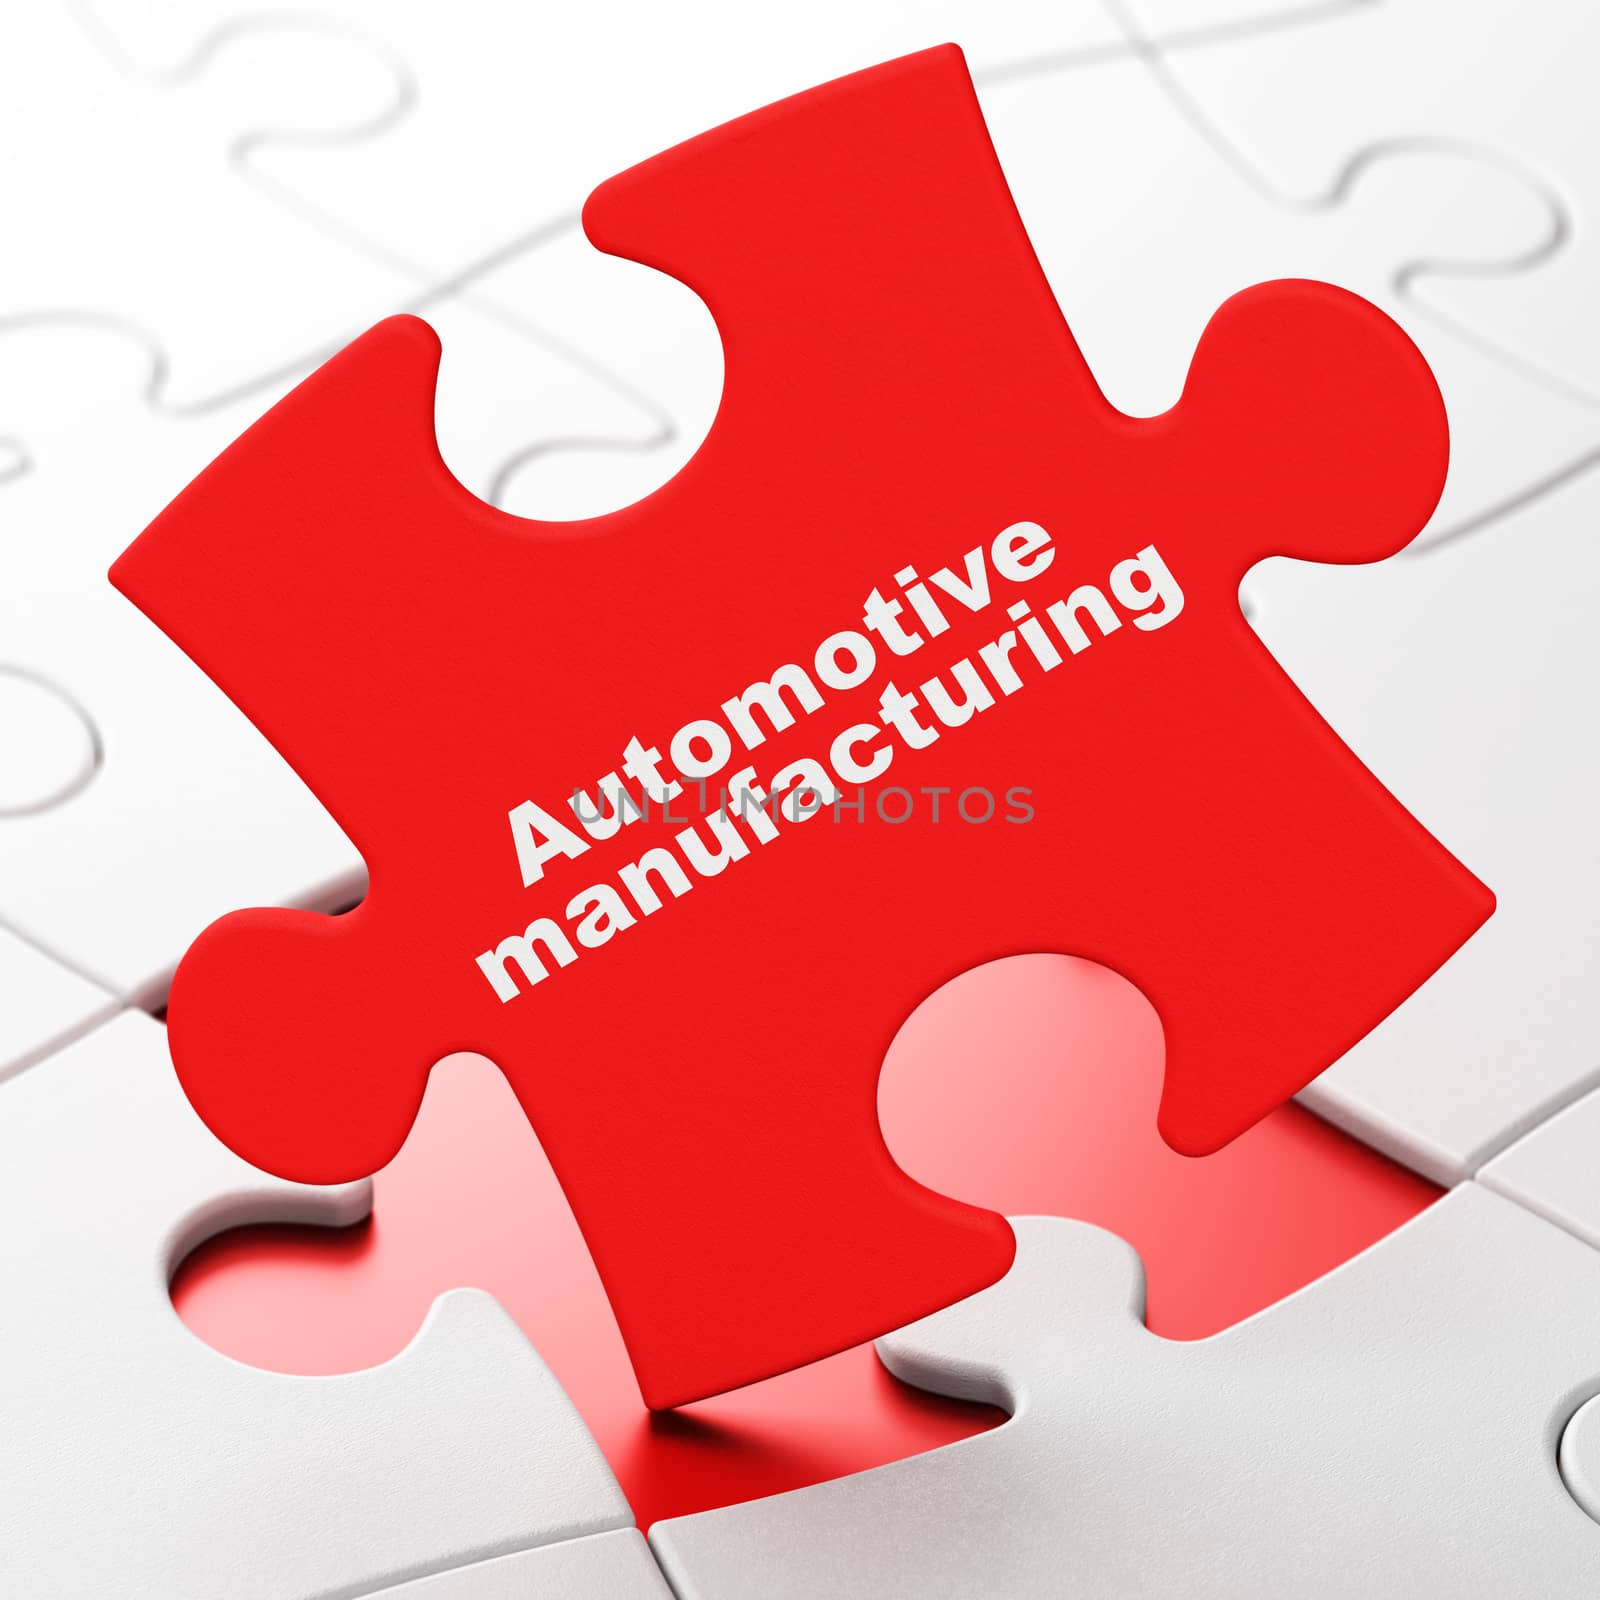 Industry concept: Automotive Manufacturing on Red puzzle pieces background, 3D rendering